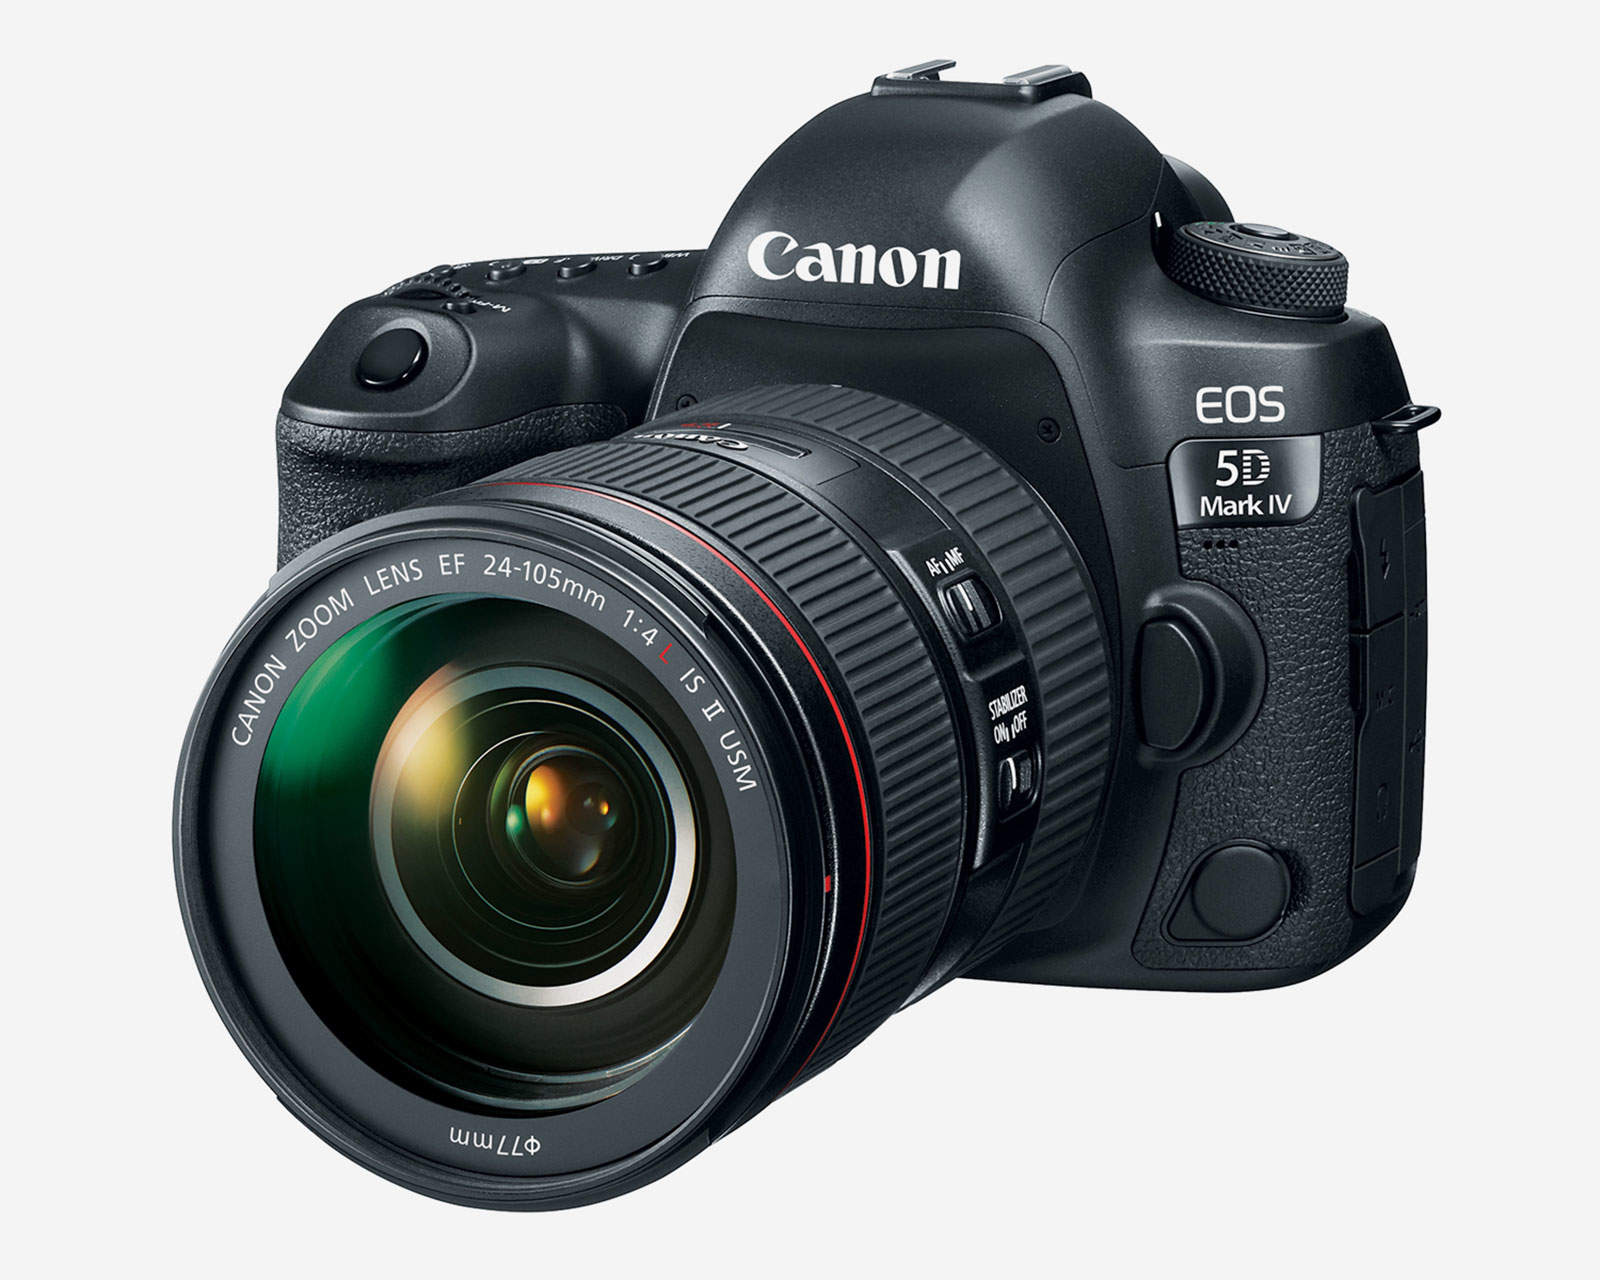 There is more to the Canon 5D Mark IV than a change in the roman numeral.